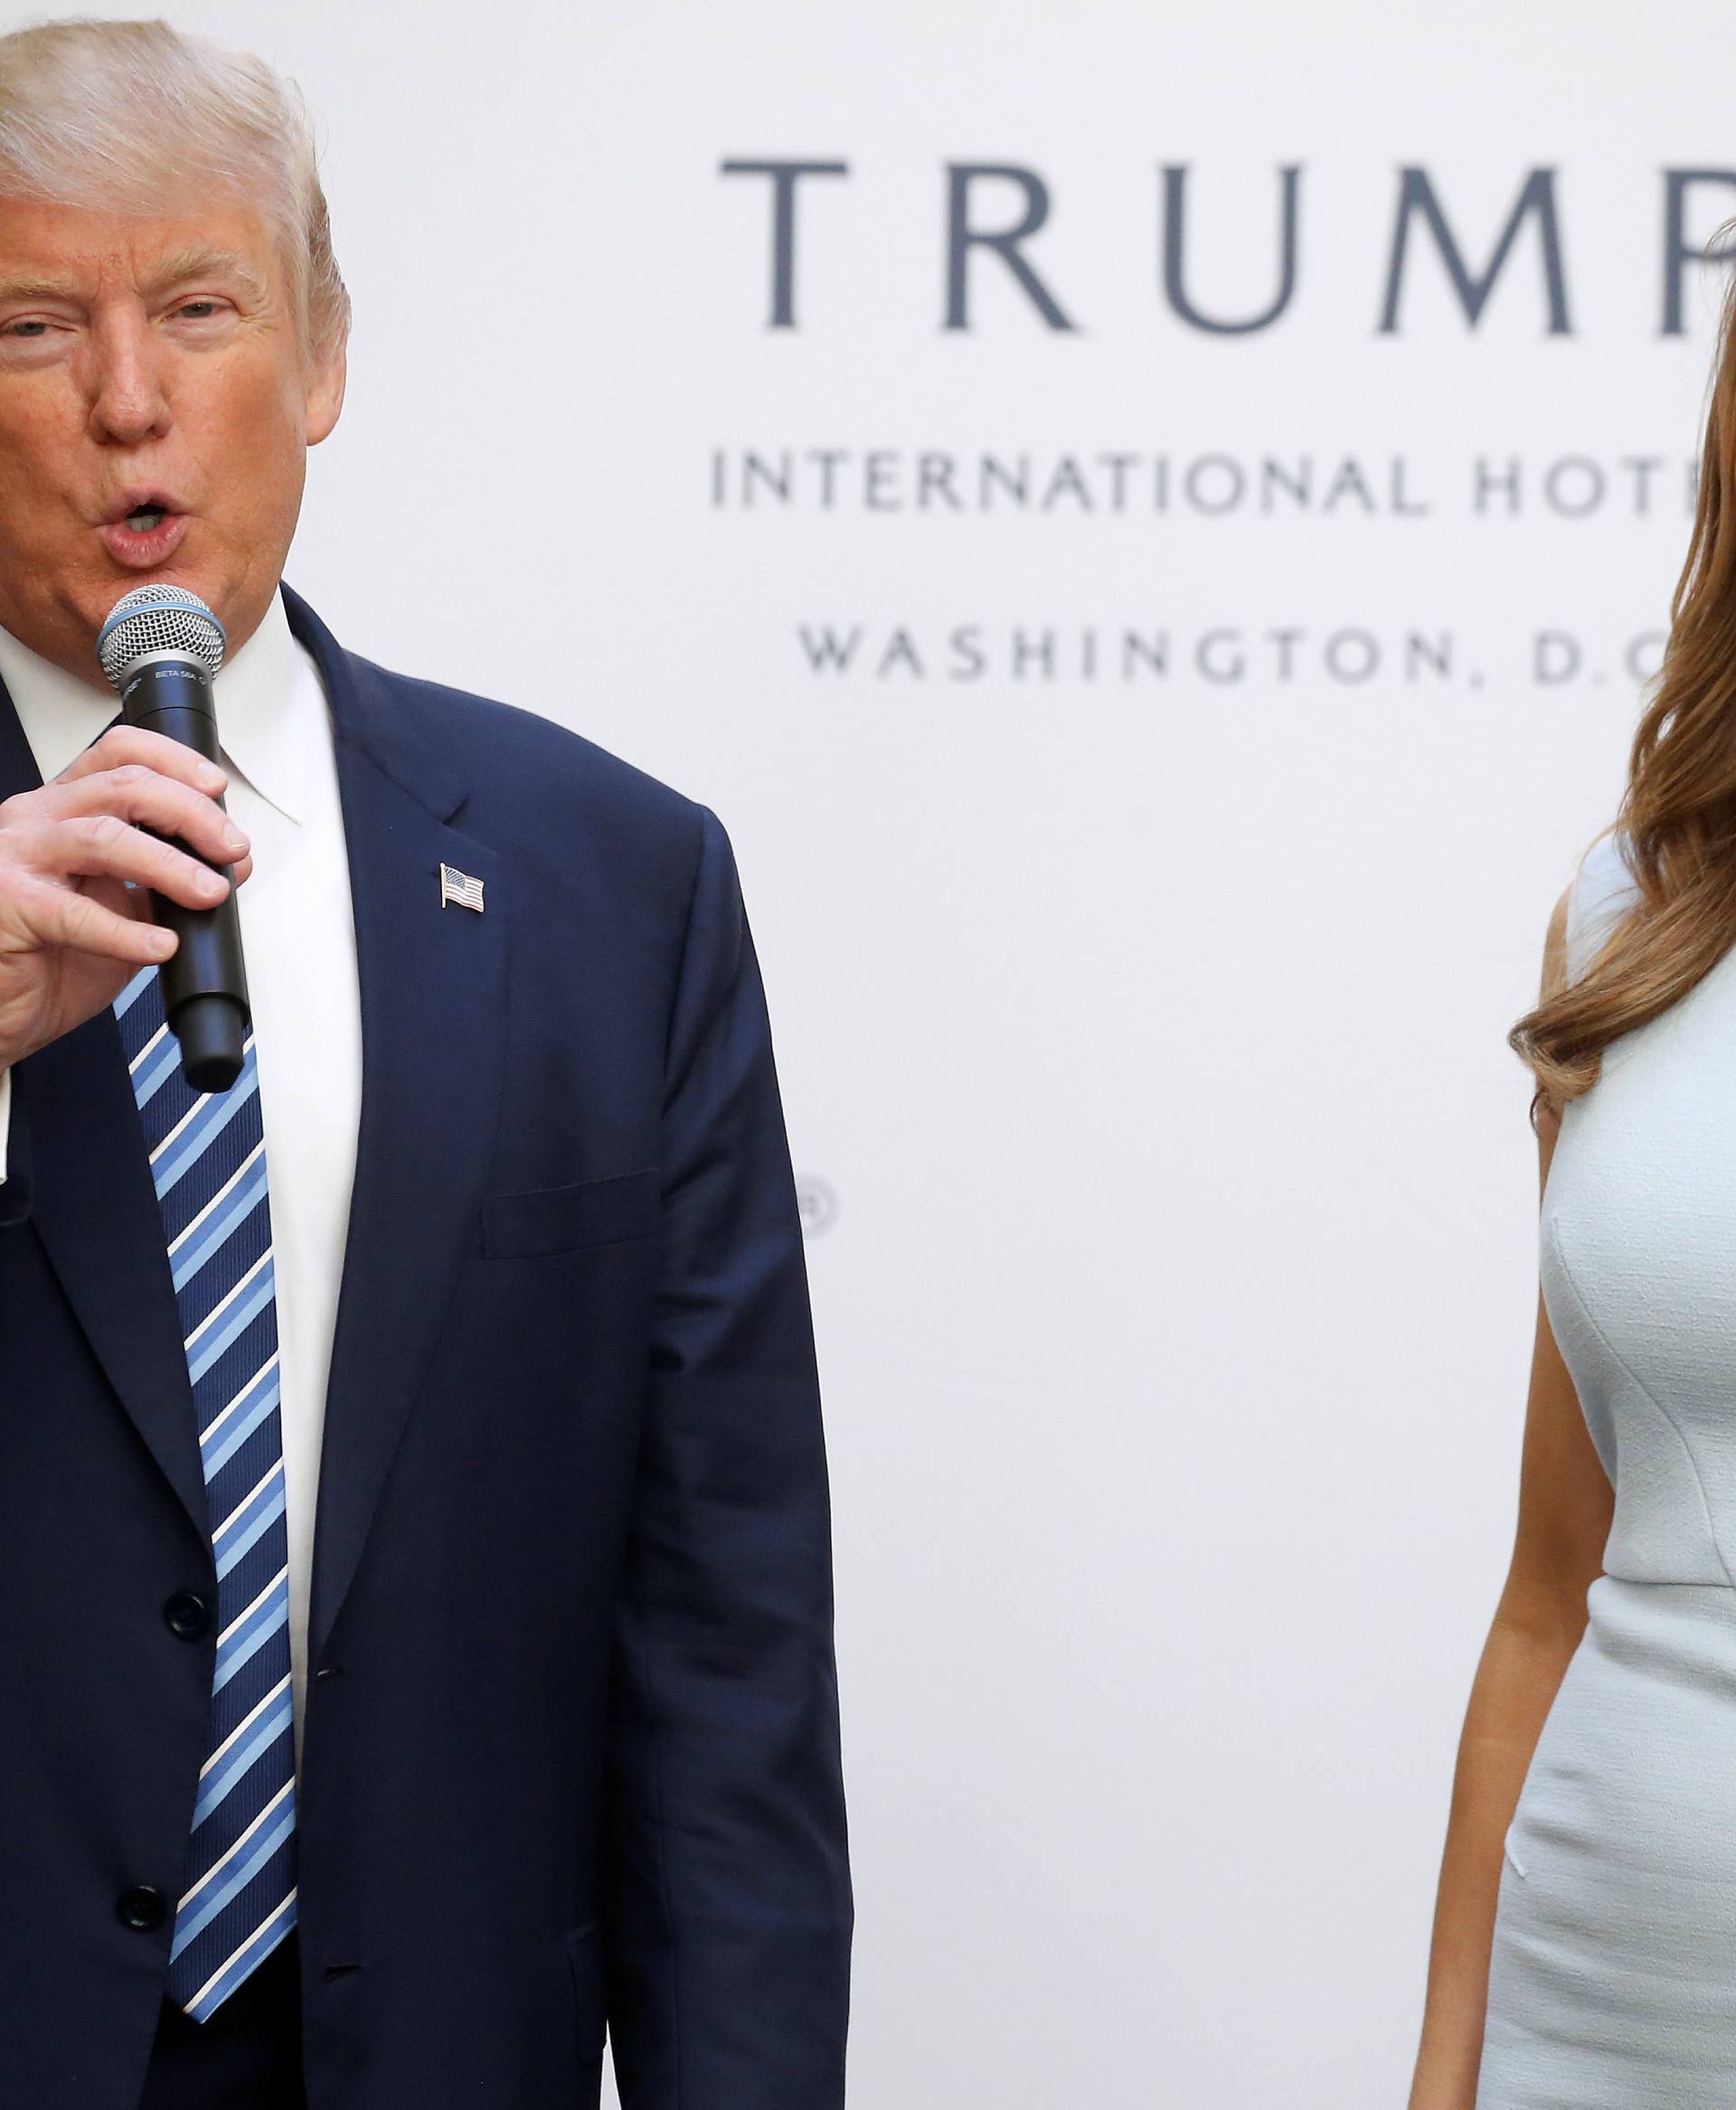 Republican presidential nominee Donald Trump and his wife Melania Trump attend a campaign event in Washington